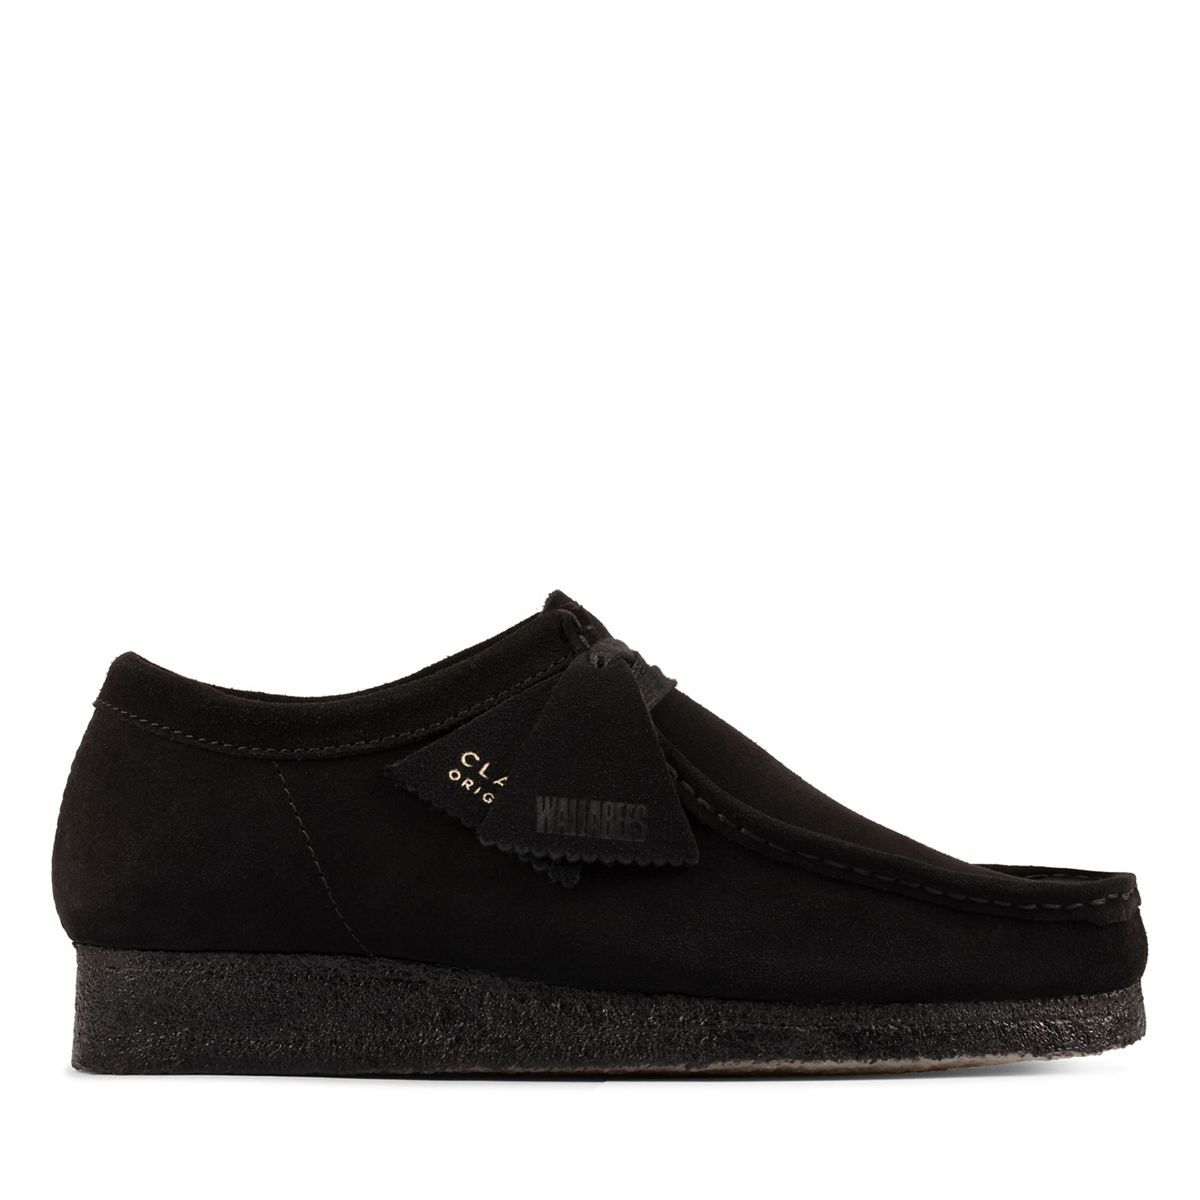 Wallabee Black Suede - Clarks Canada Official Site | Shoes